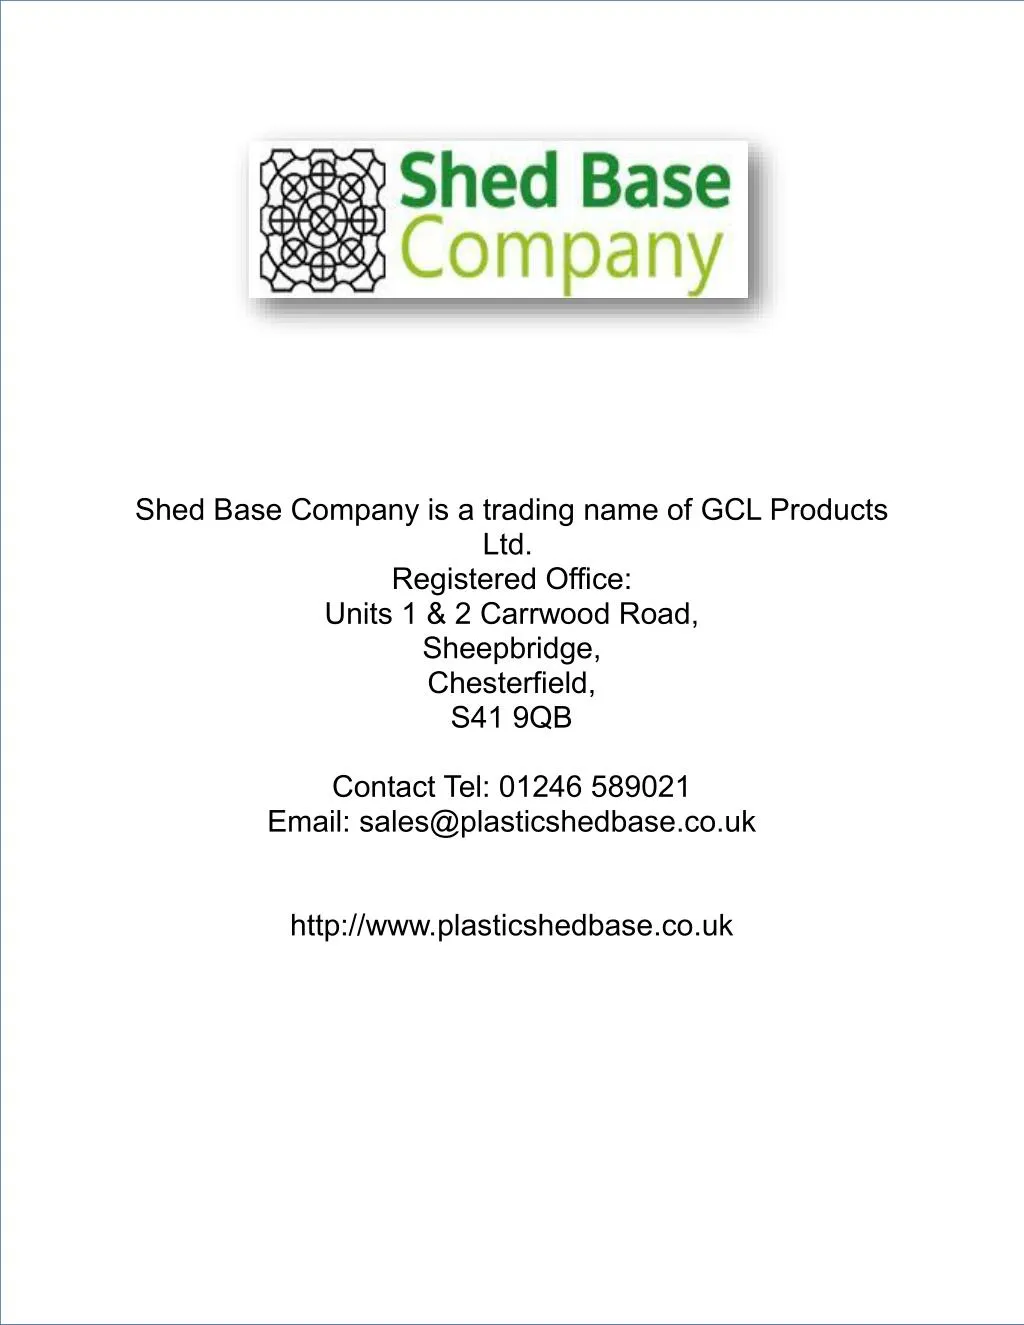 shed base company is a trading name